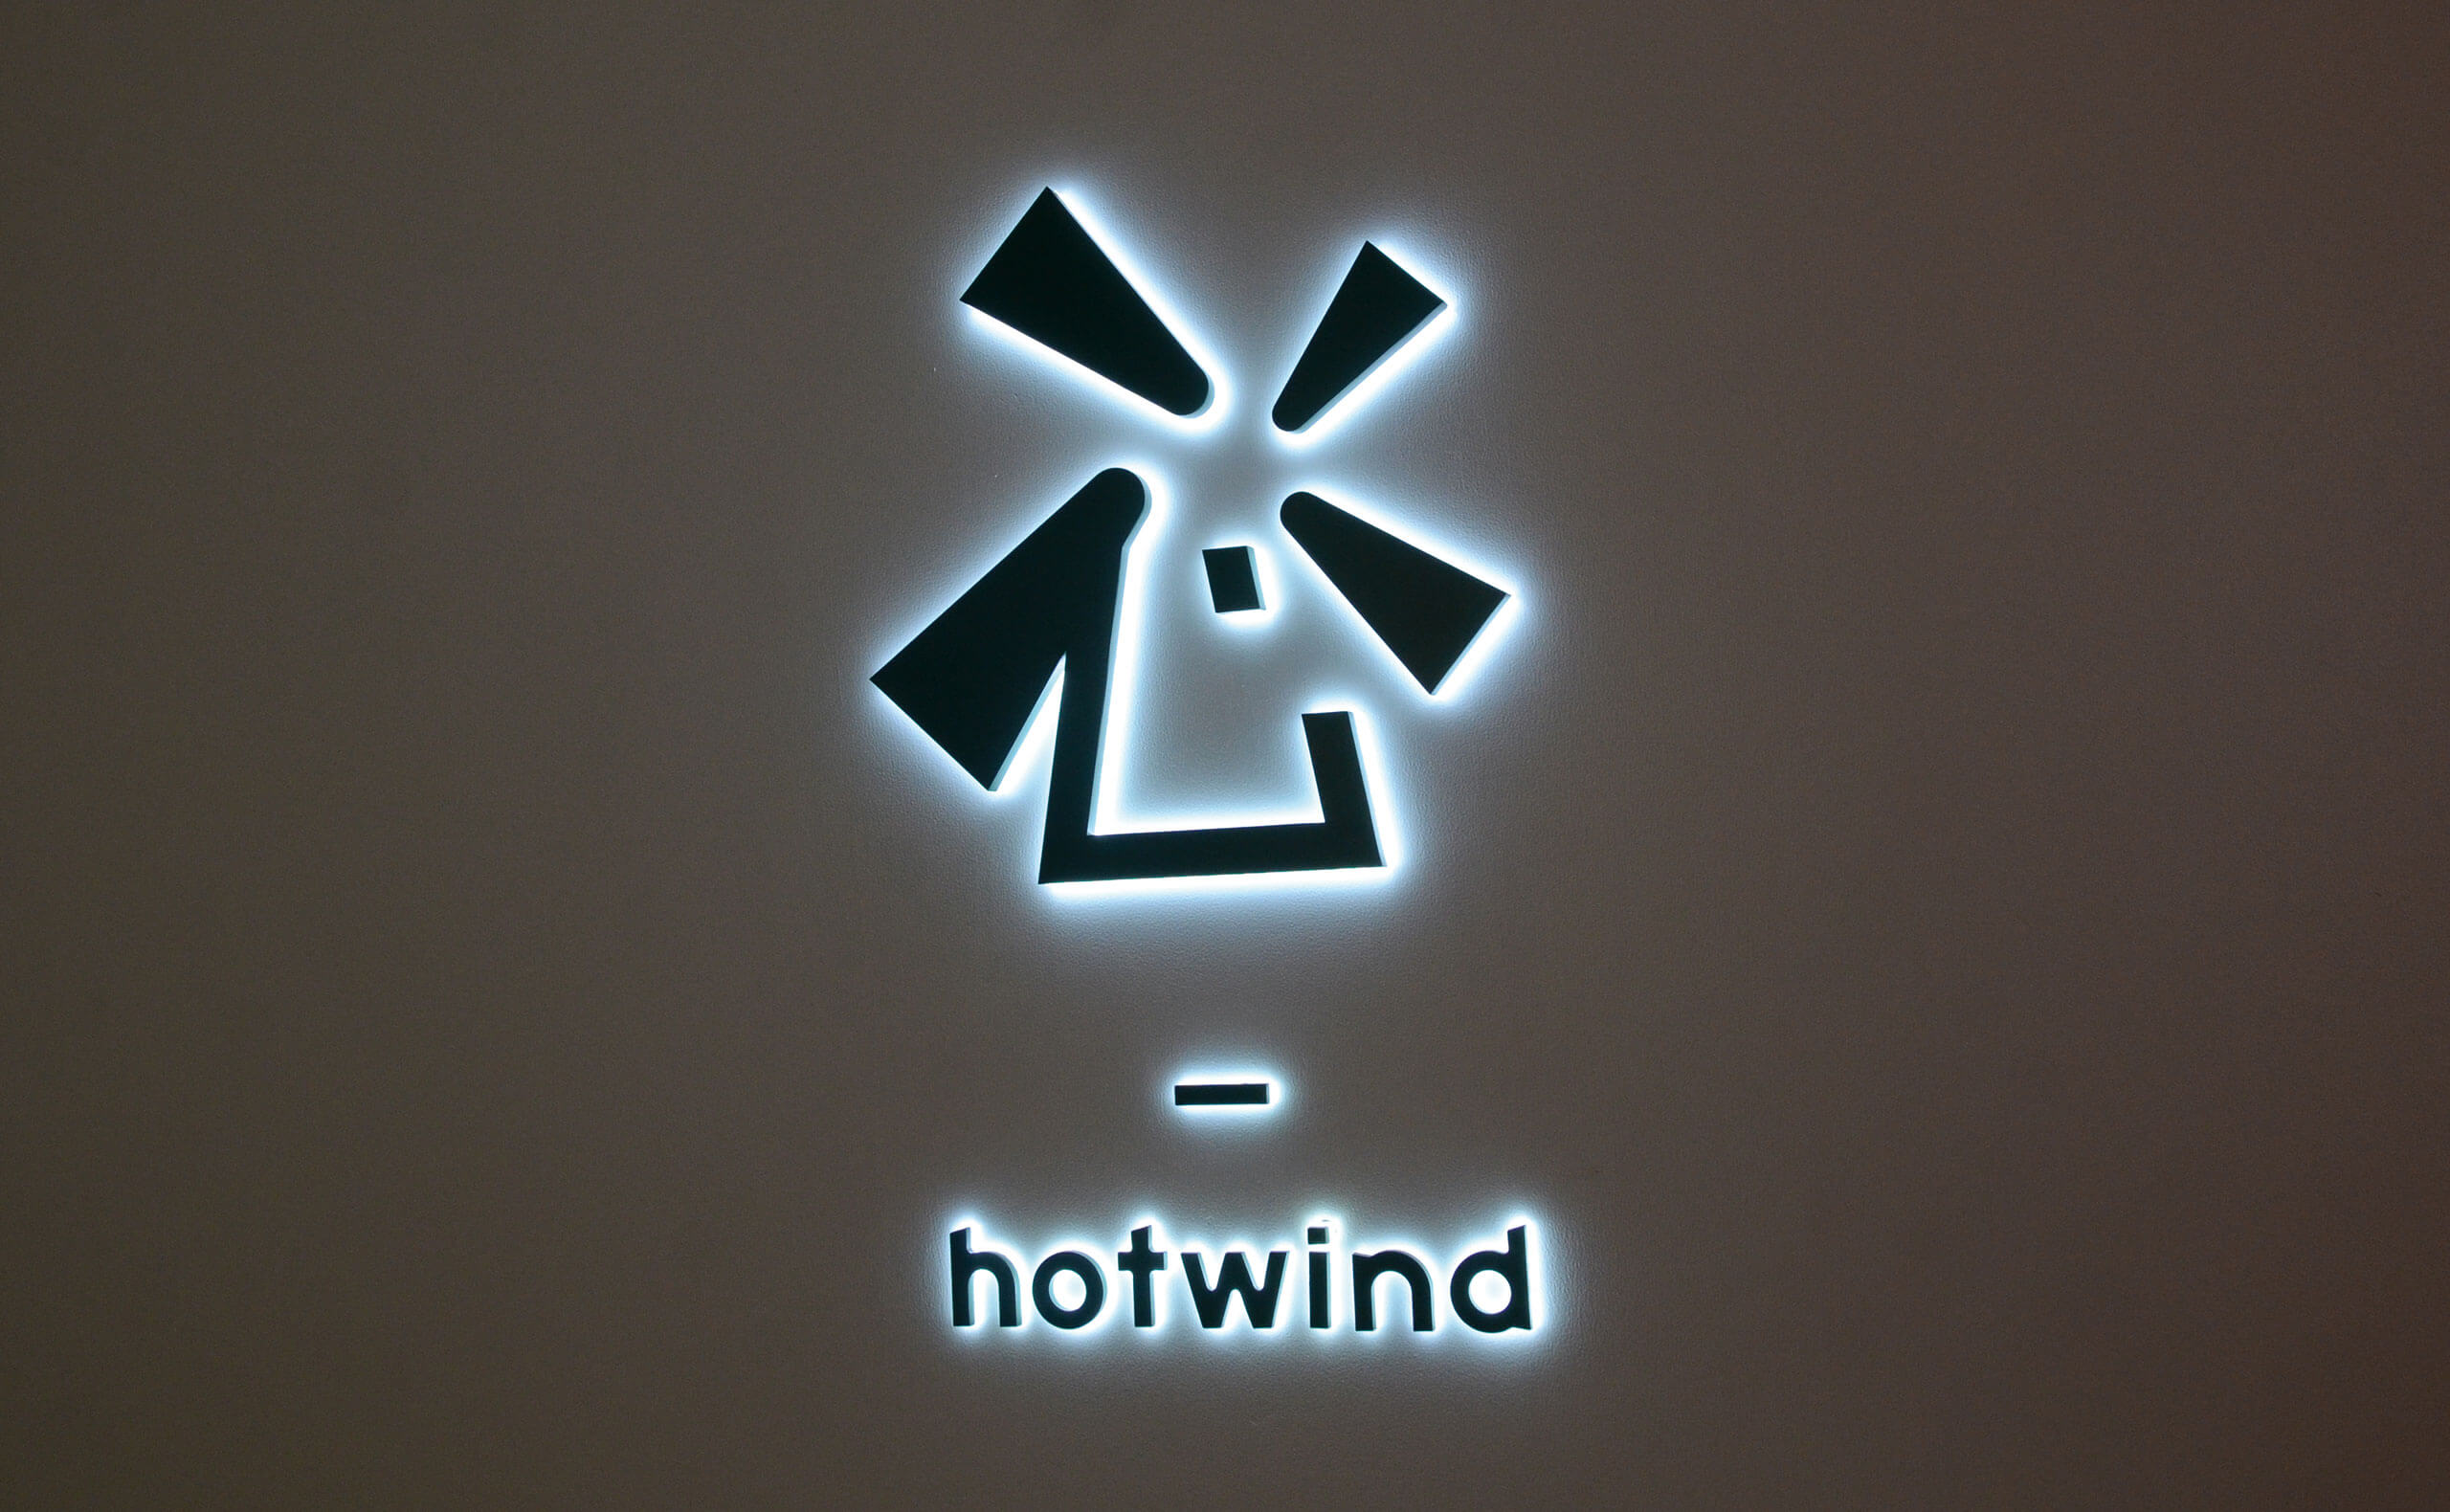 Luxury Metal Backlit Channel Letters For Hotwind